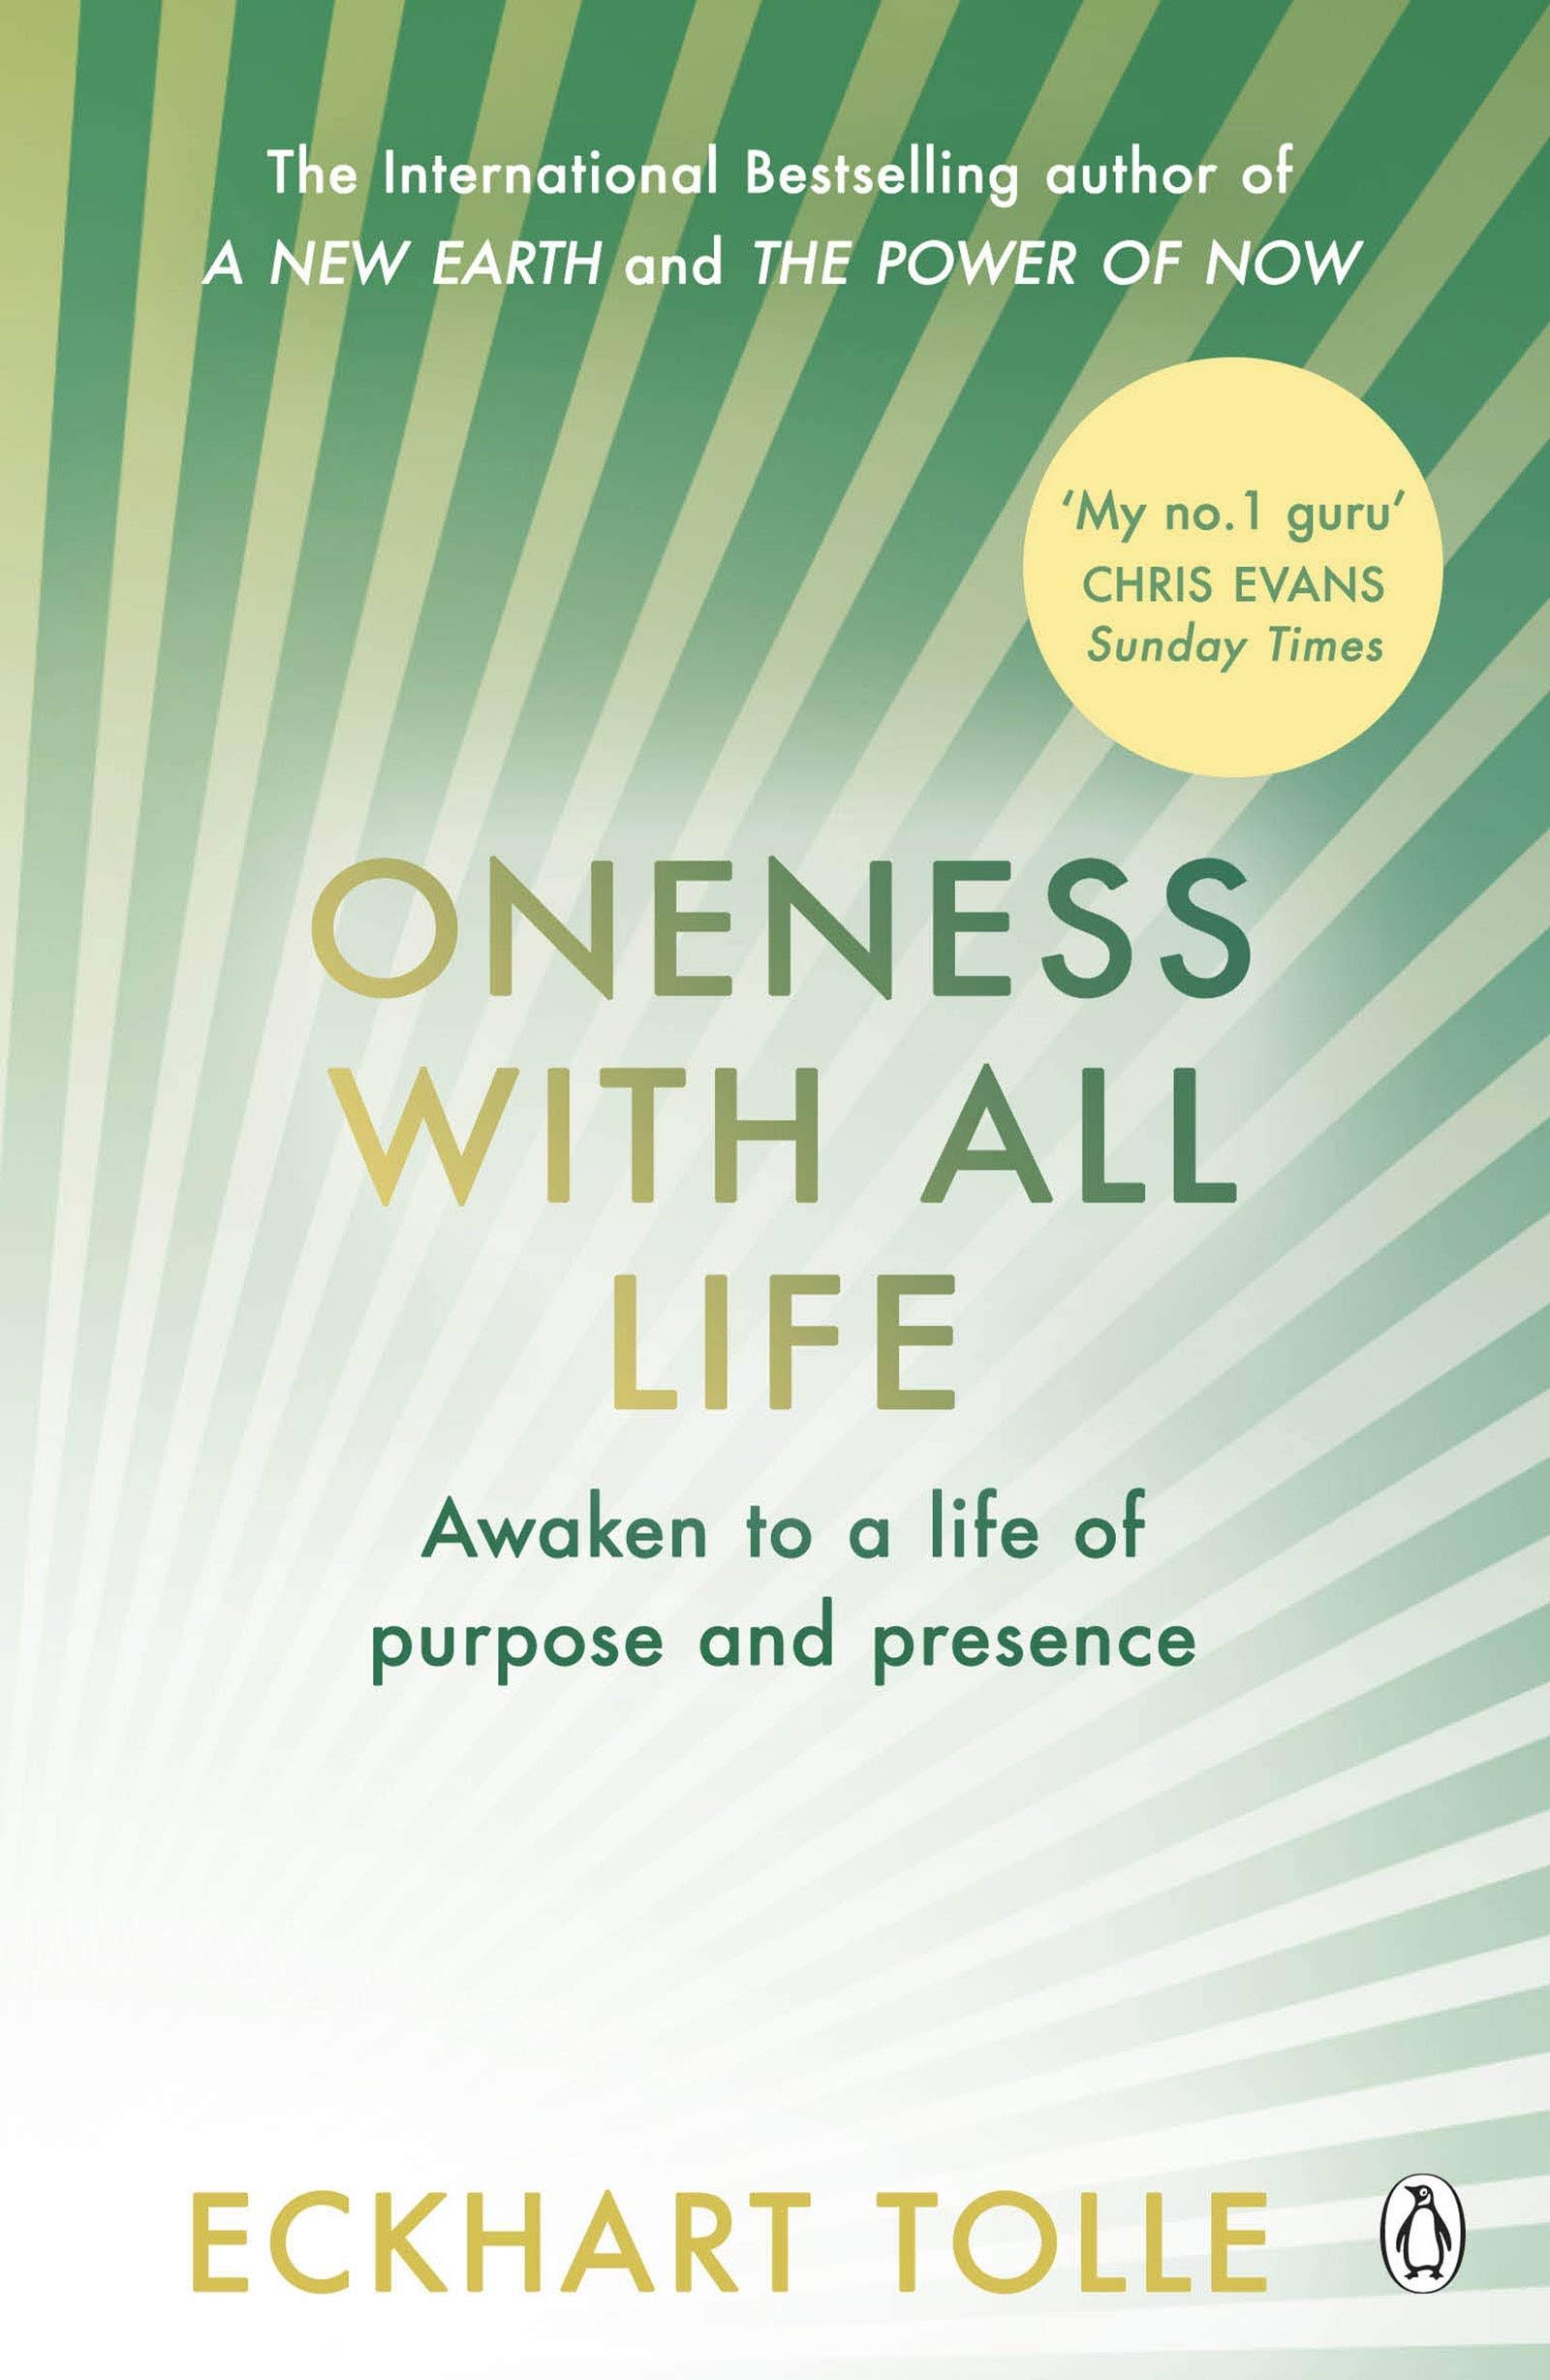 Oneness with All Life: Find Your Inner Peace with the International Bestselling Author of a New Earth and the Power of Now [Book]